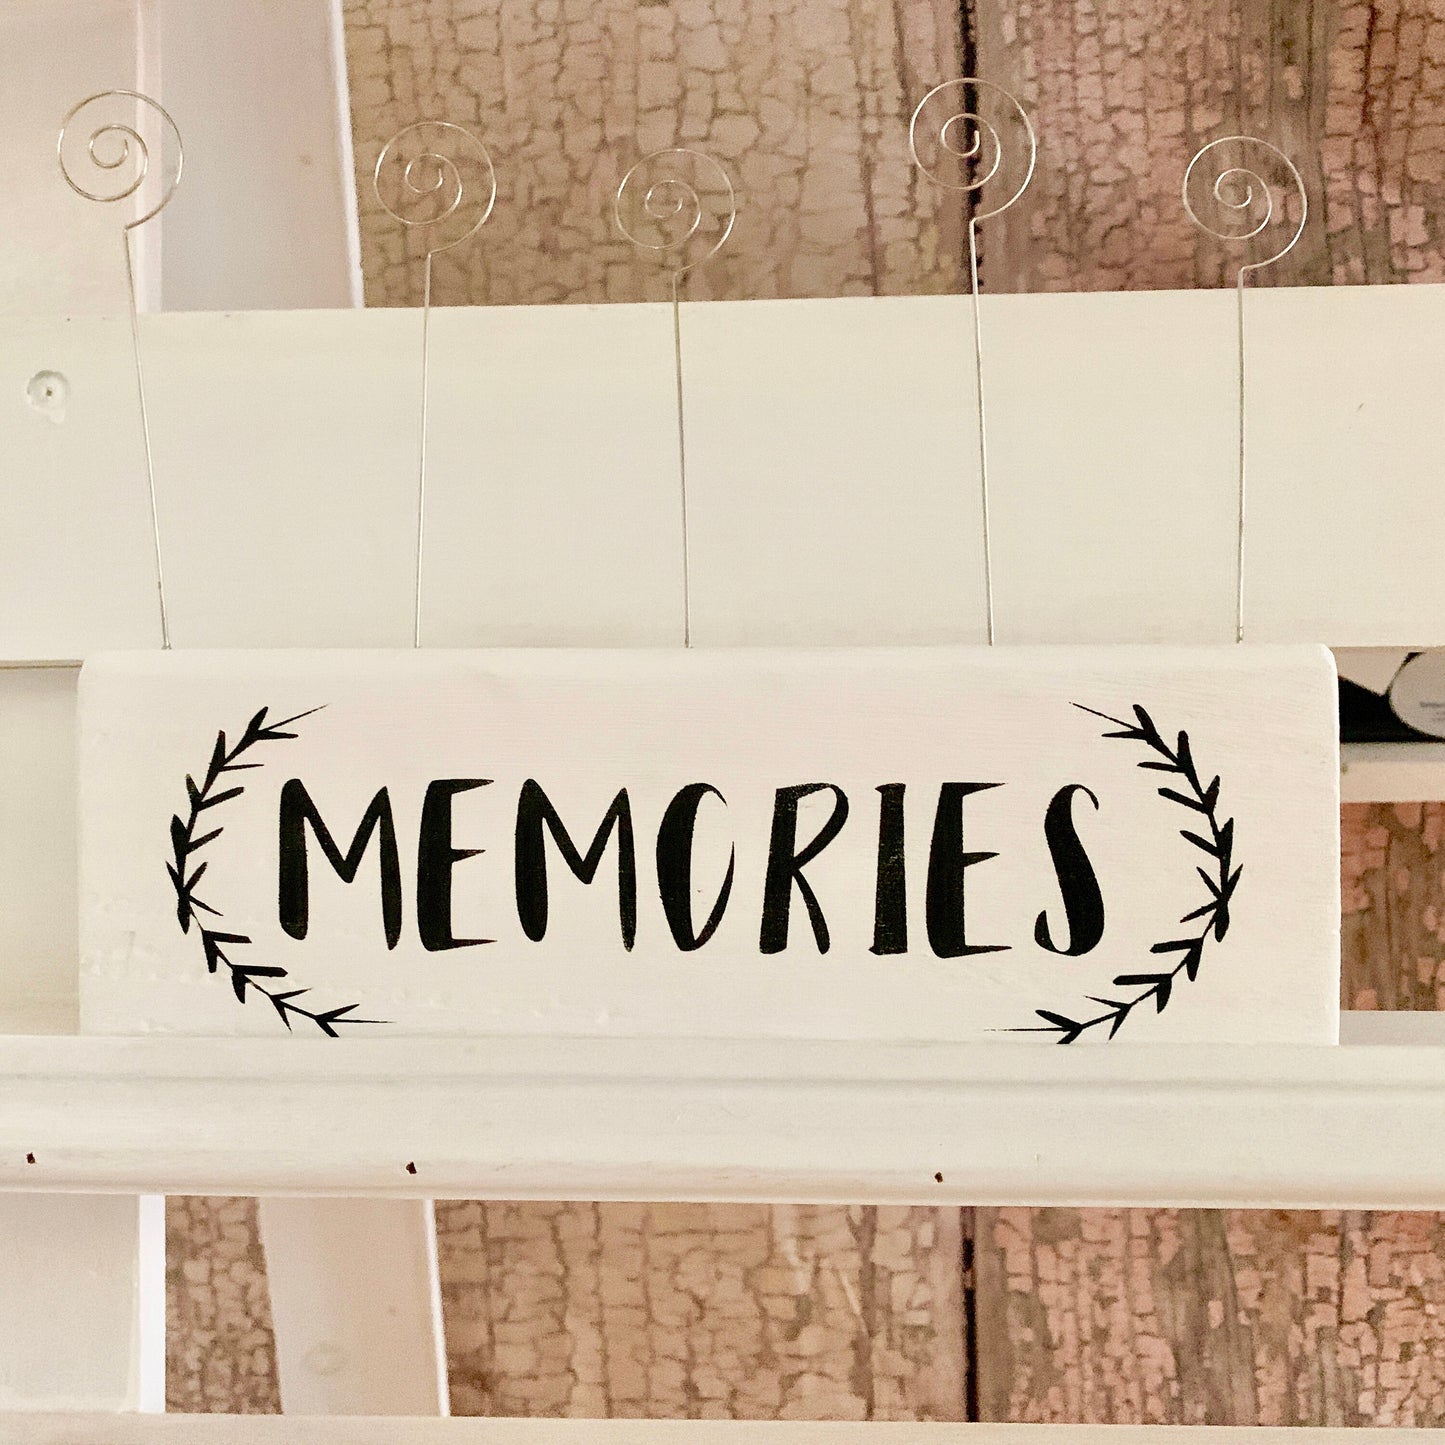 Memories Photo Holder of Rustic Wood and Wire|Farmhouse Picture Holder